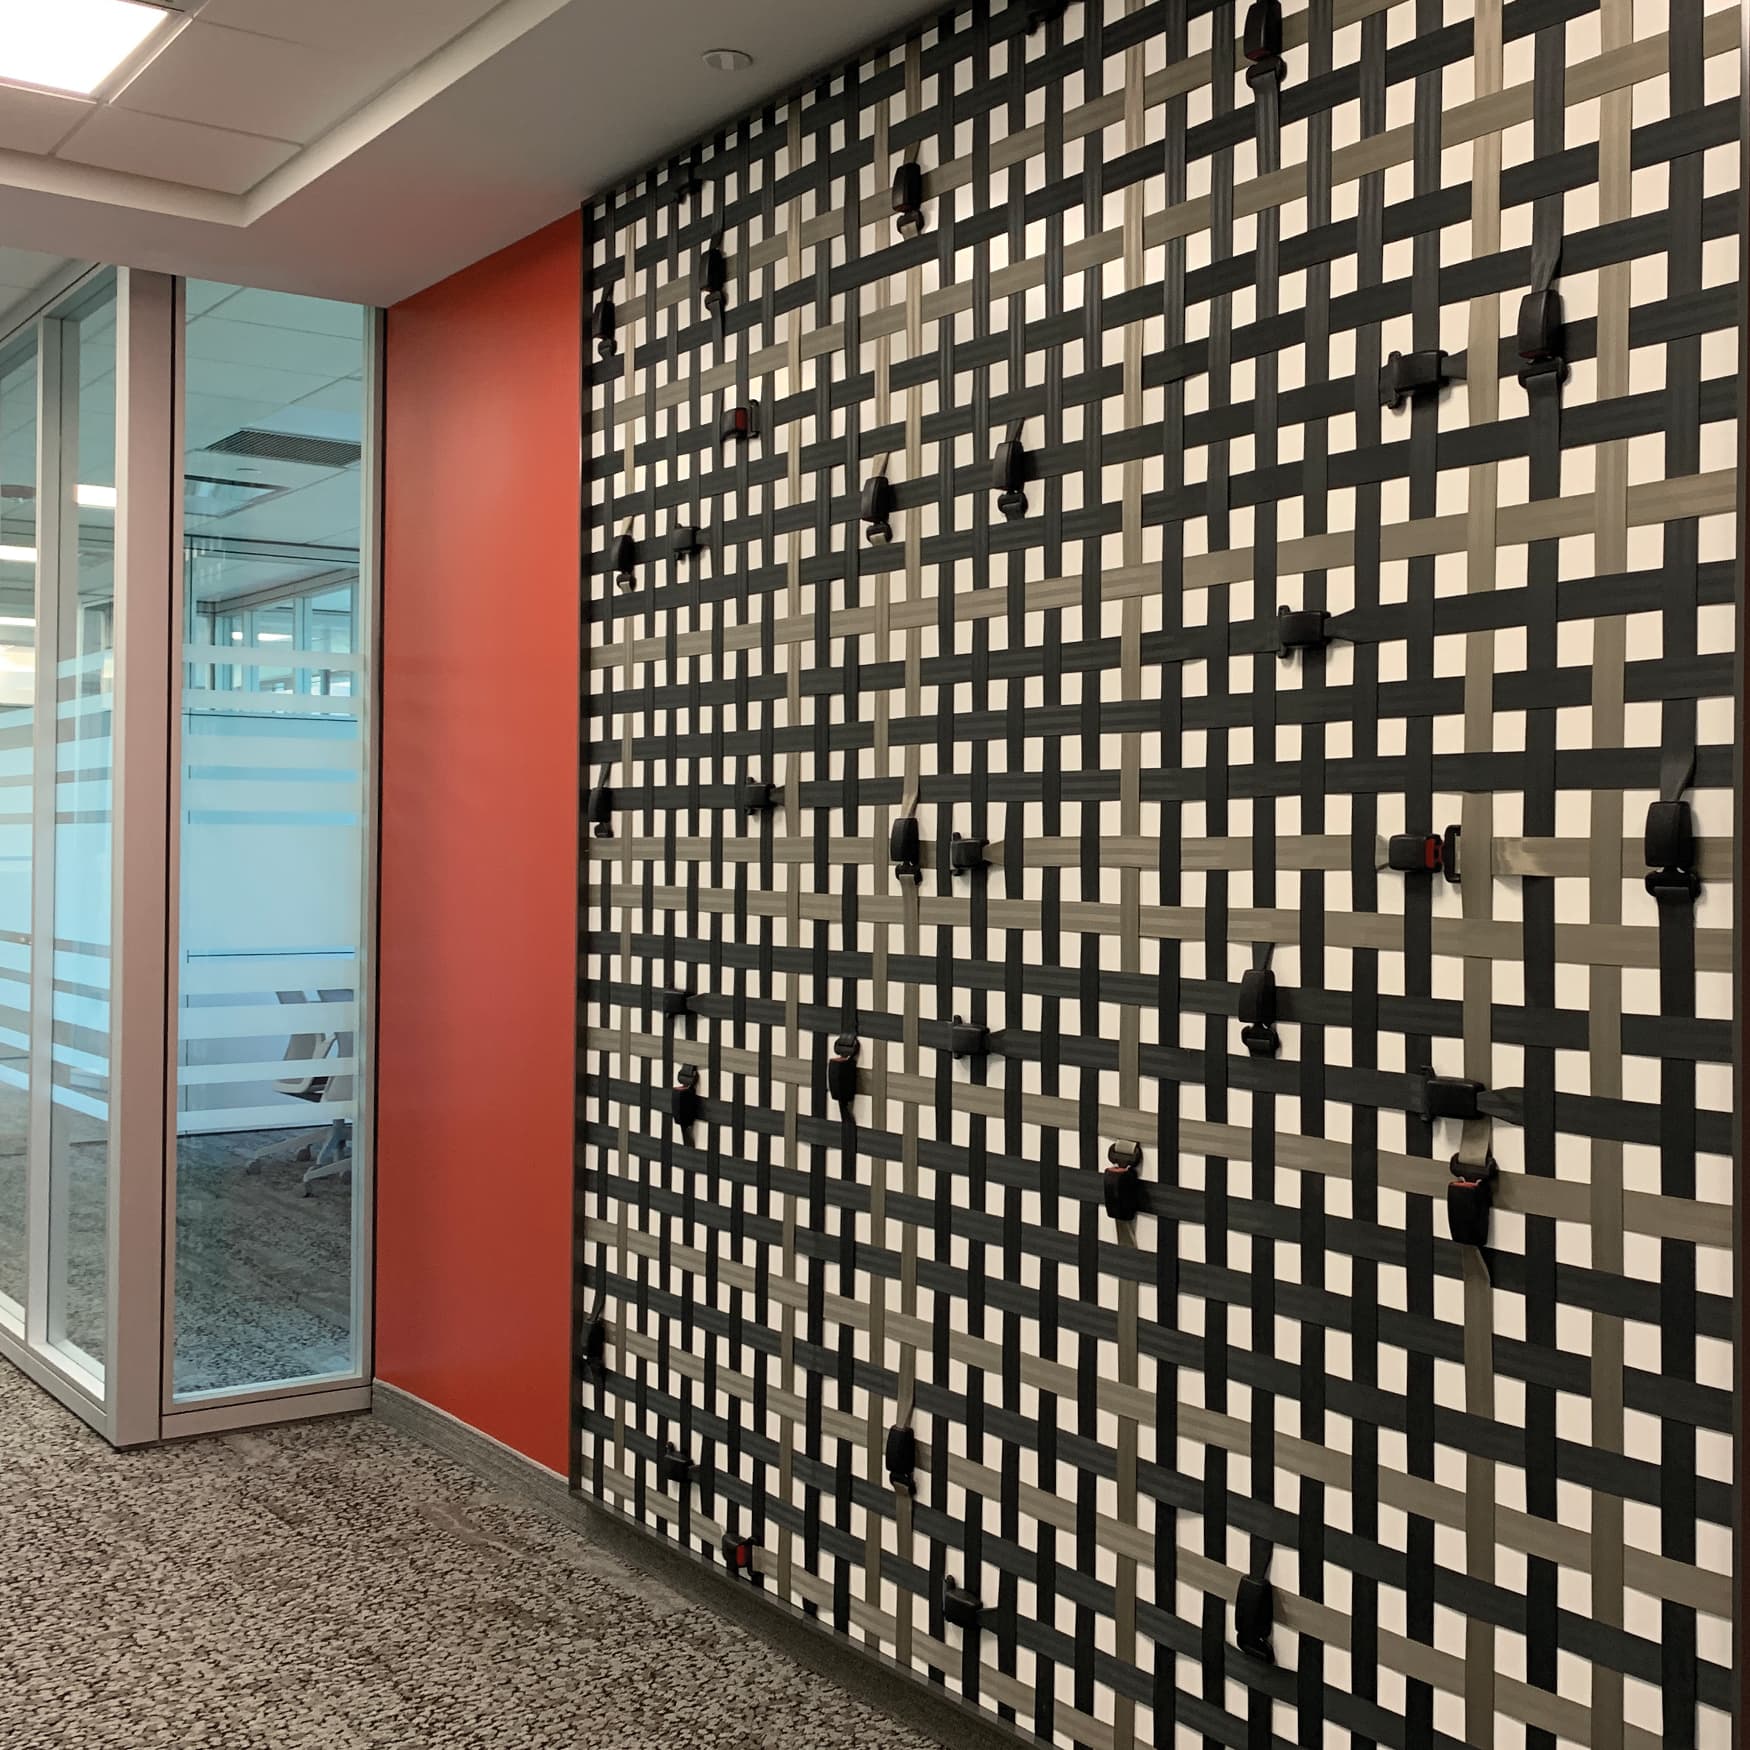 Speciality art mural by RSM Design for JMFE Headquarters consisting of seatbelts in a grid pattern for office workplace design. Seatbelt art. 